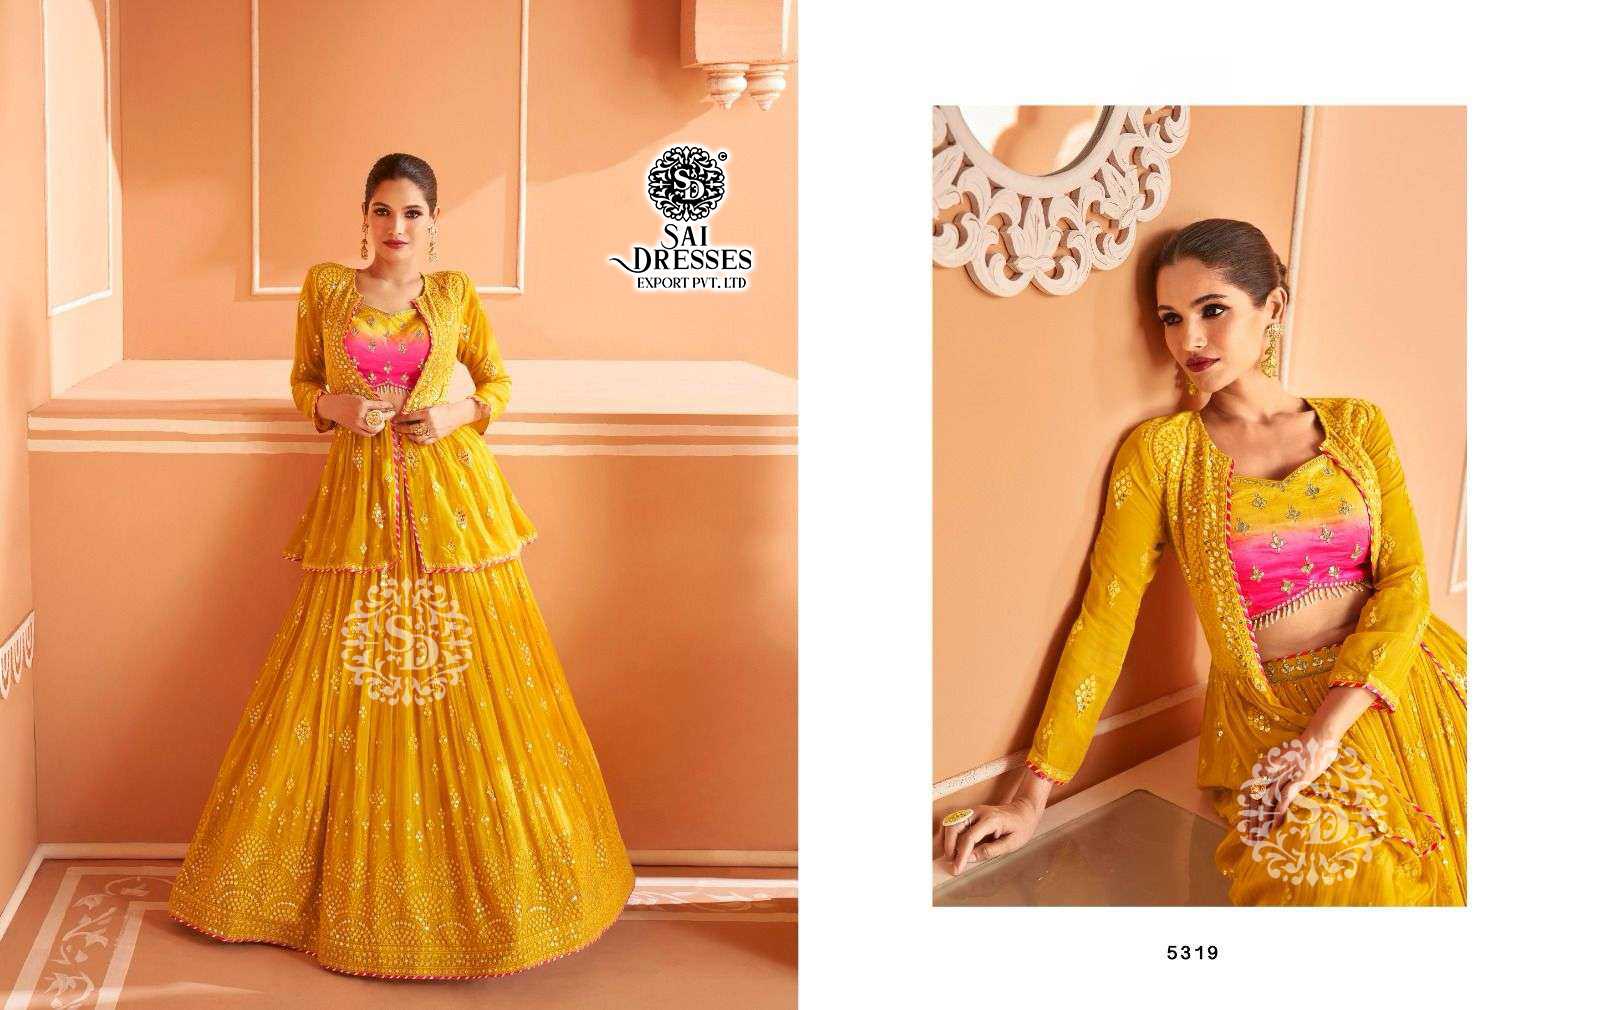 SAI DRESSES PRESENT KALISHTA READYMADE SPECIAL WEDDING WEAR BEAUTIFUL HEAVY DESIGNER SUITS IN WHOLESALE RATE IN SURAT